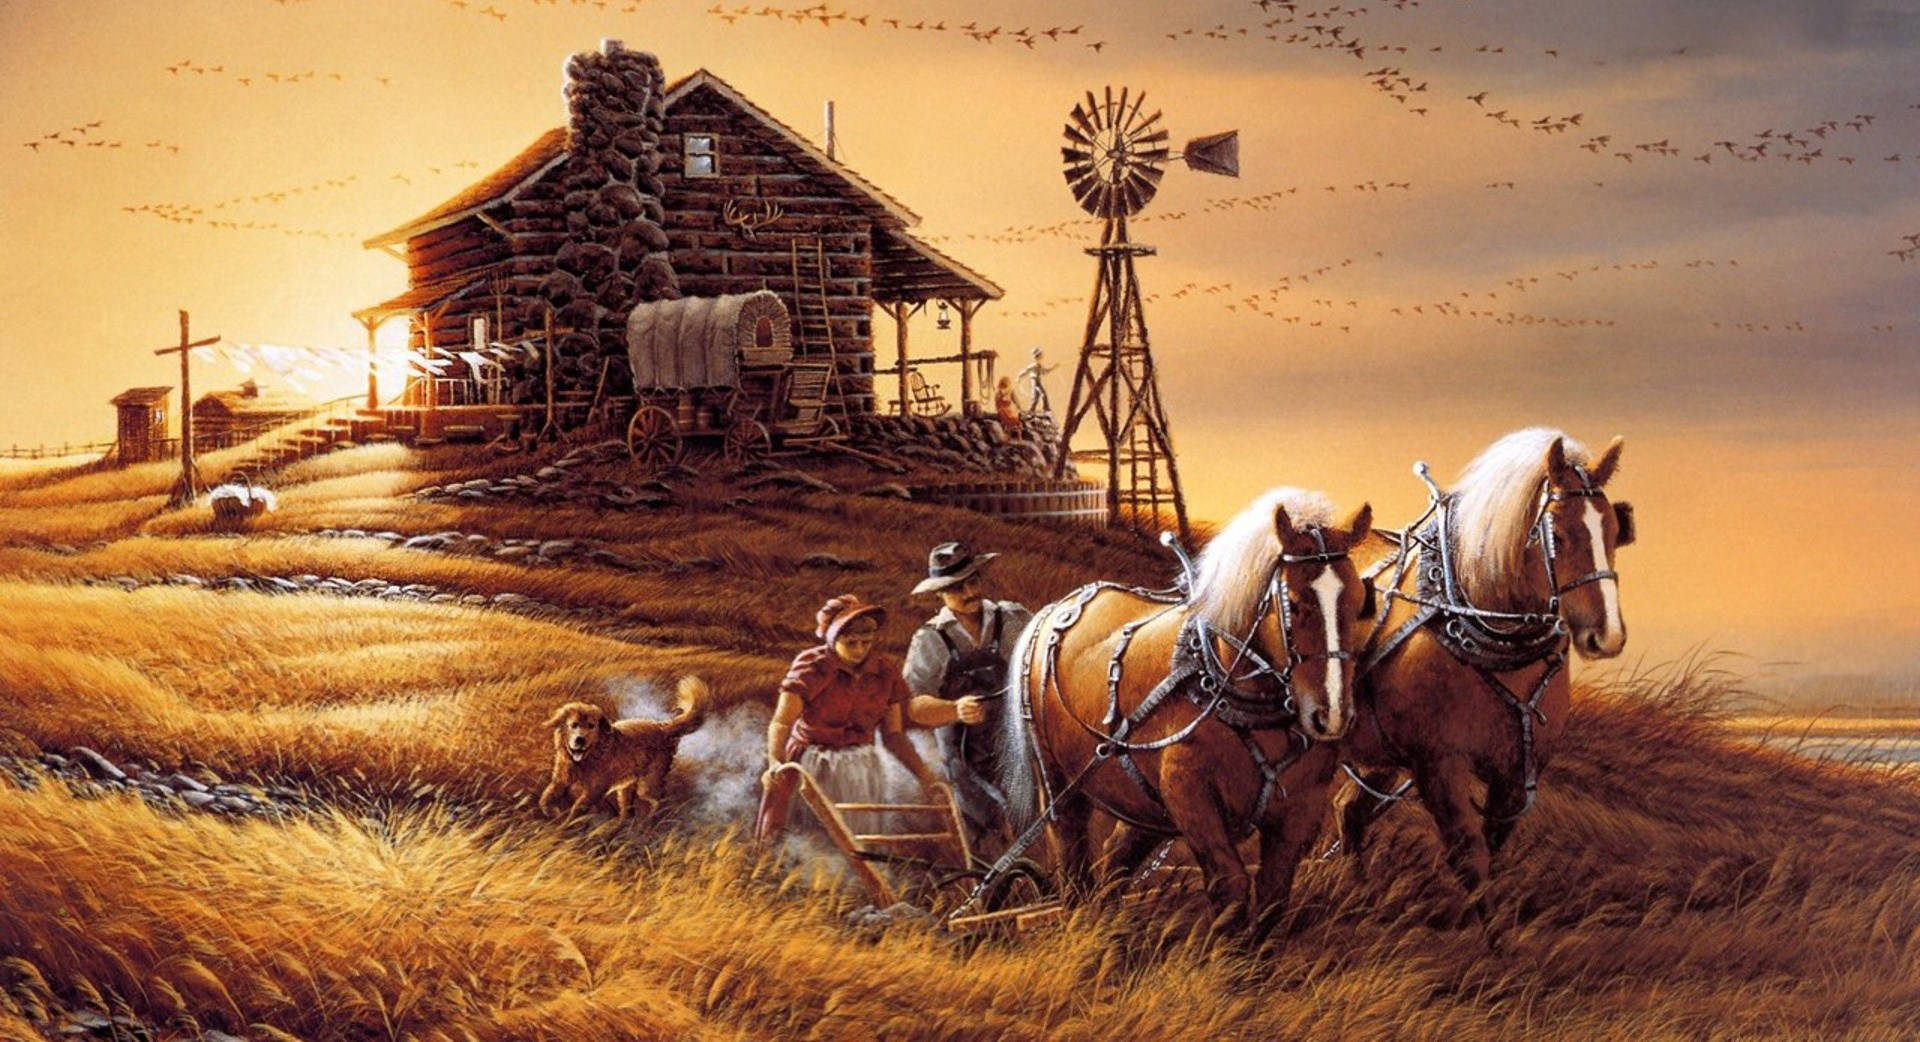 A Painting Of A Farm With Horses And Windmill Wallpaper